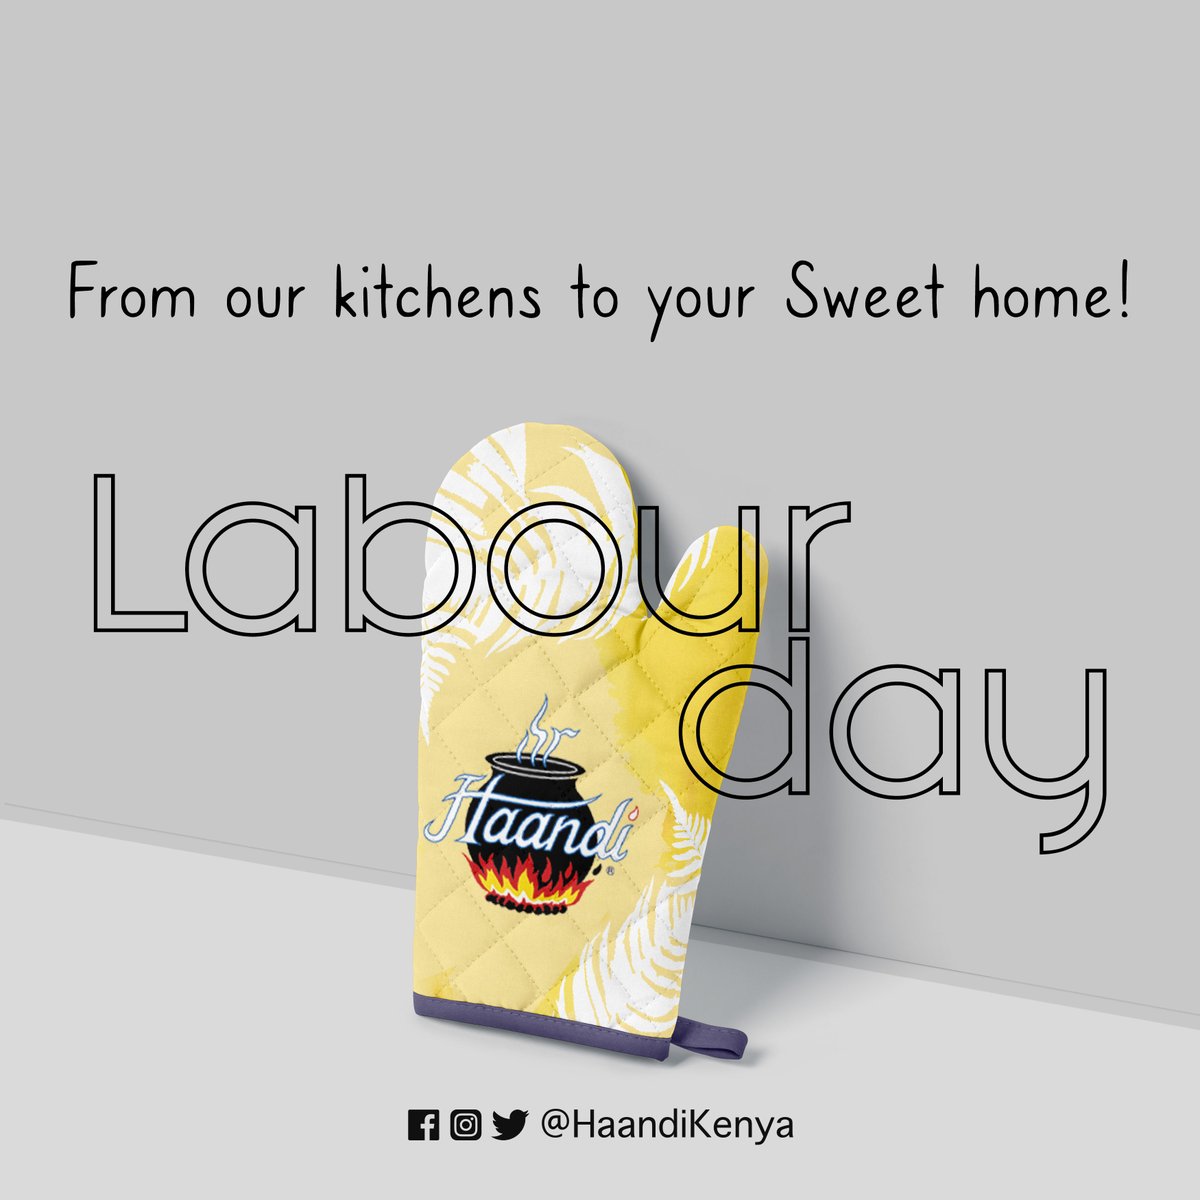 From our kitchens to your Sweet home, happy #LabourDay